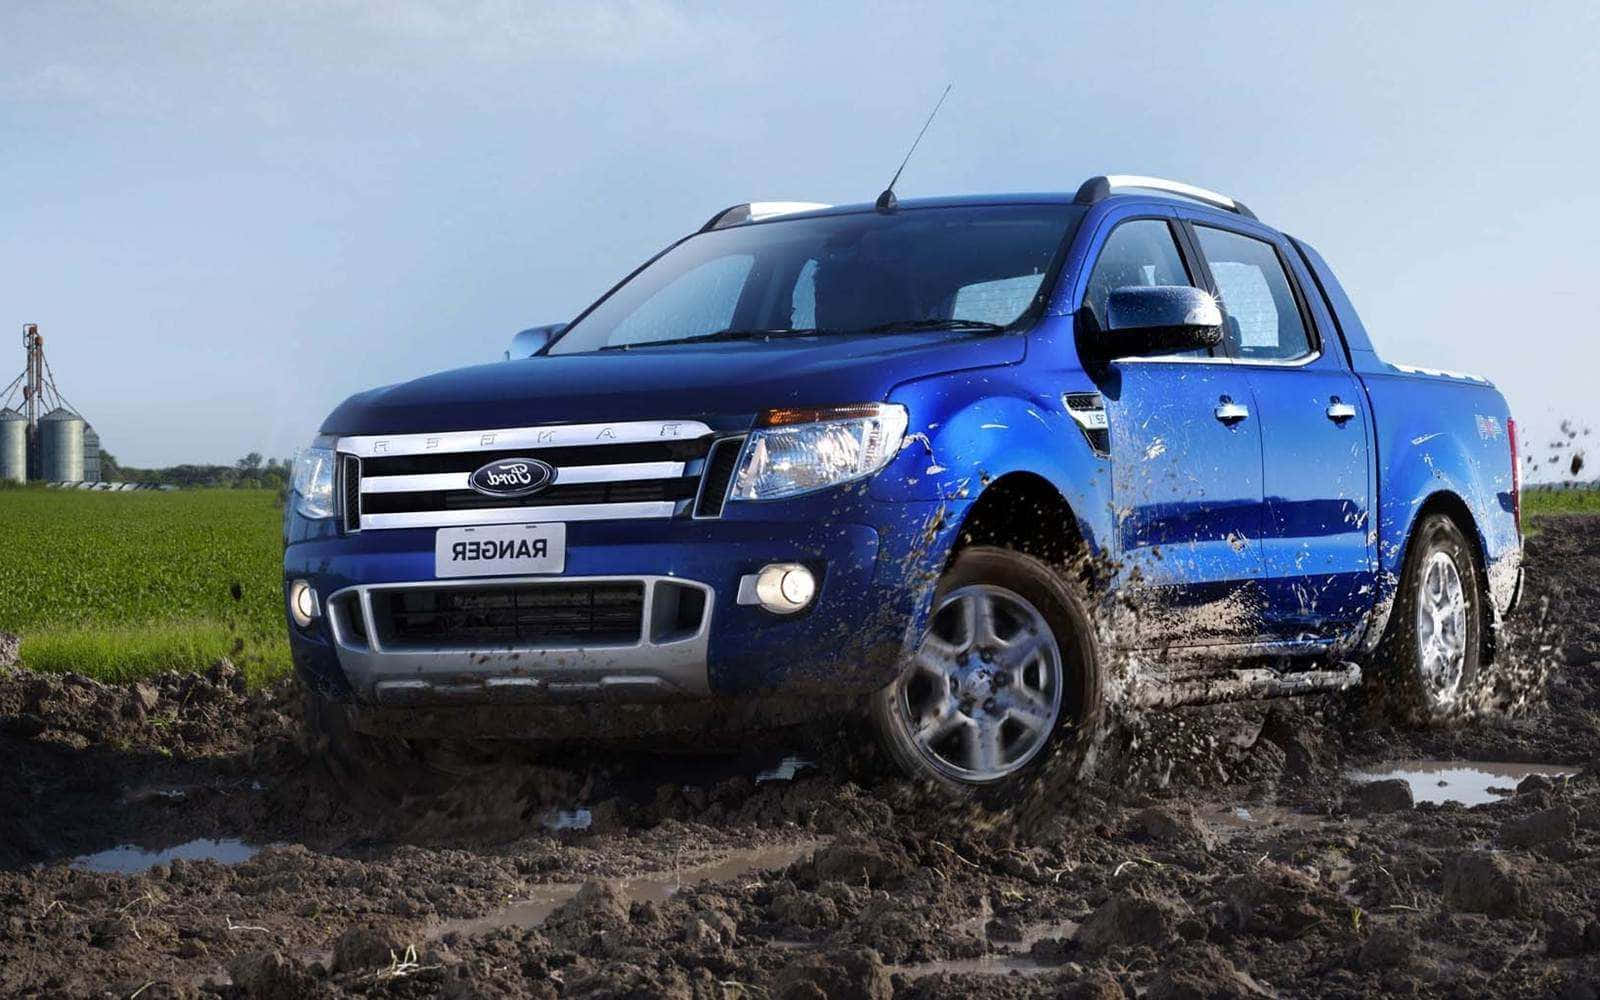 Stunning Ford Ranger in its Element Wallpaper